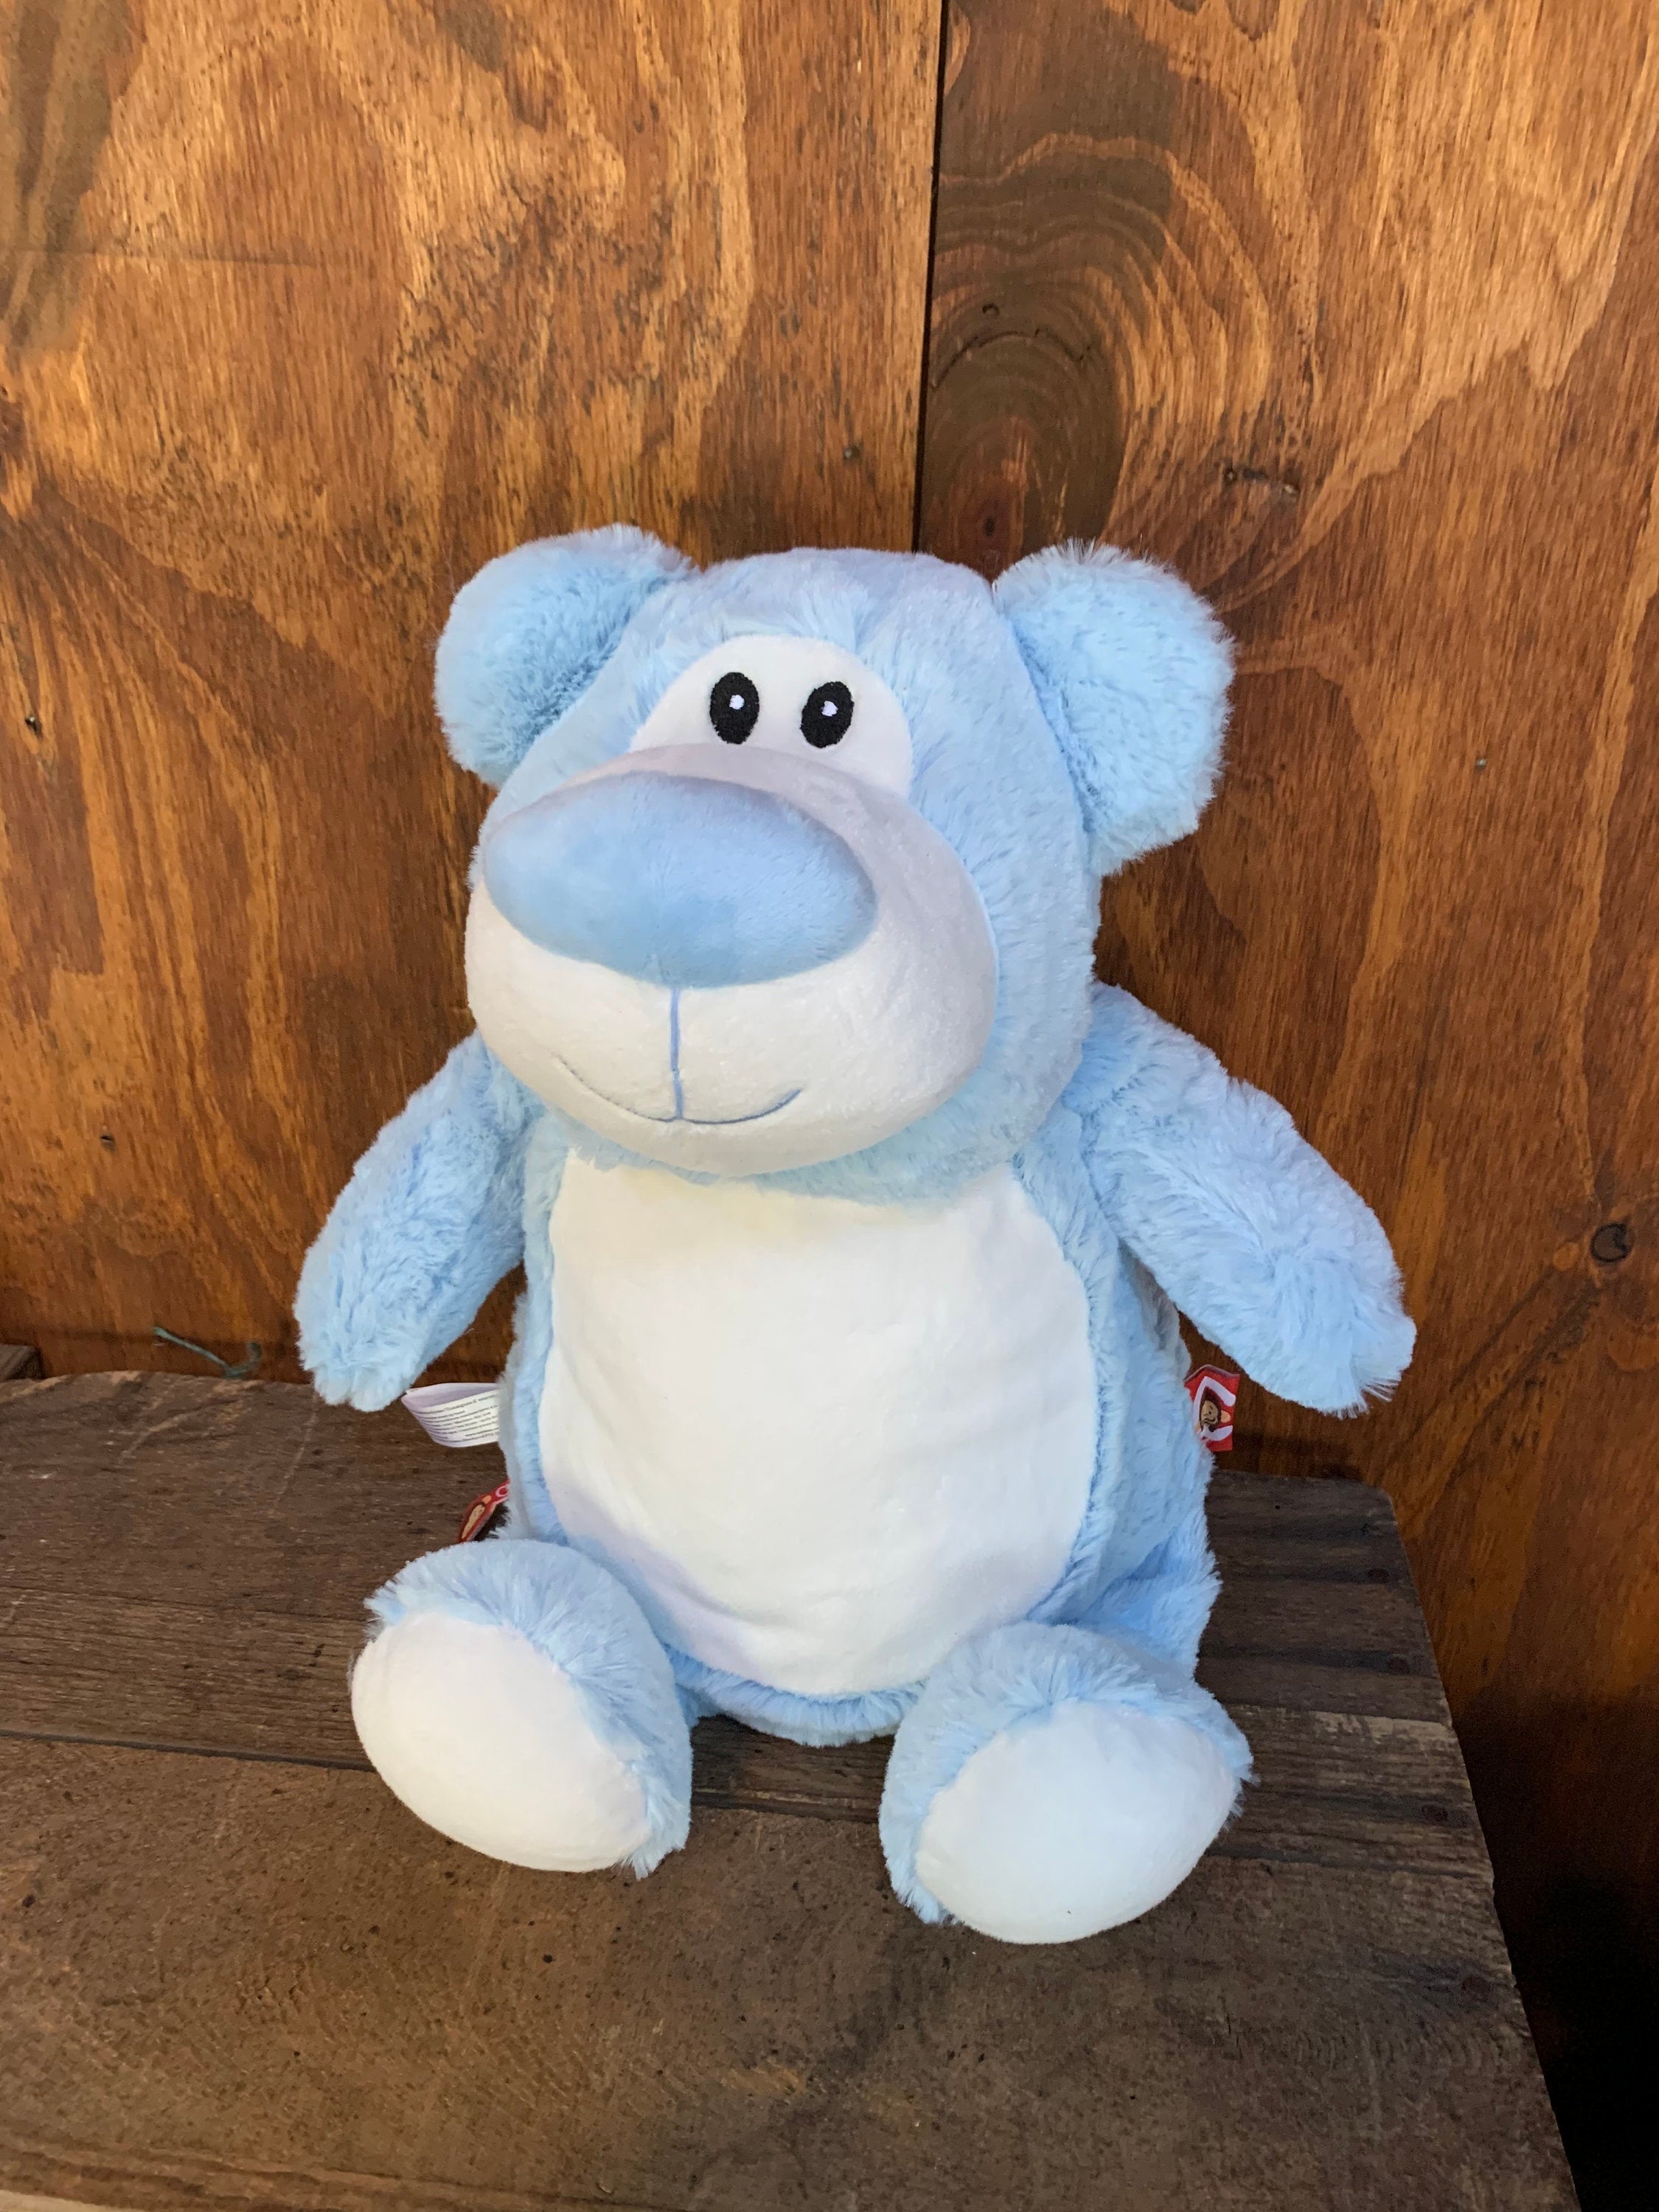 Personalized Bear Stuffed Animal, Embroidered Plush Blue Bear Cubbie Pals, monogrammed kids gifts, Washable Stuffed Animals